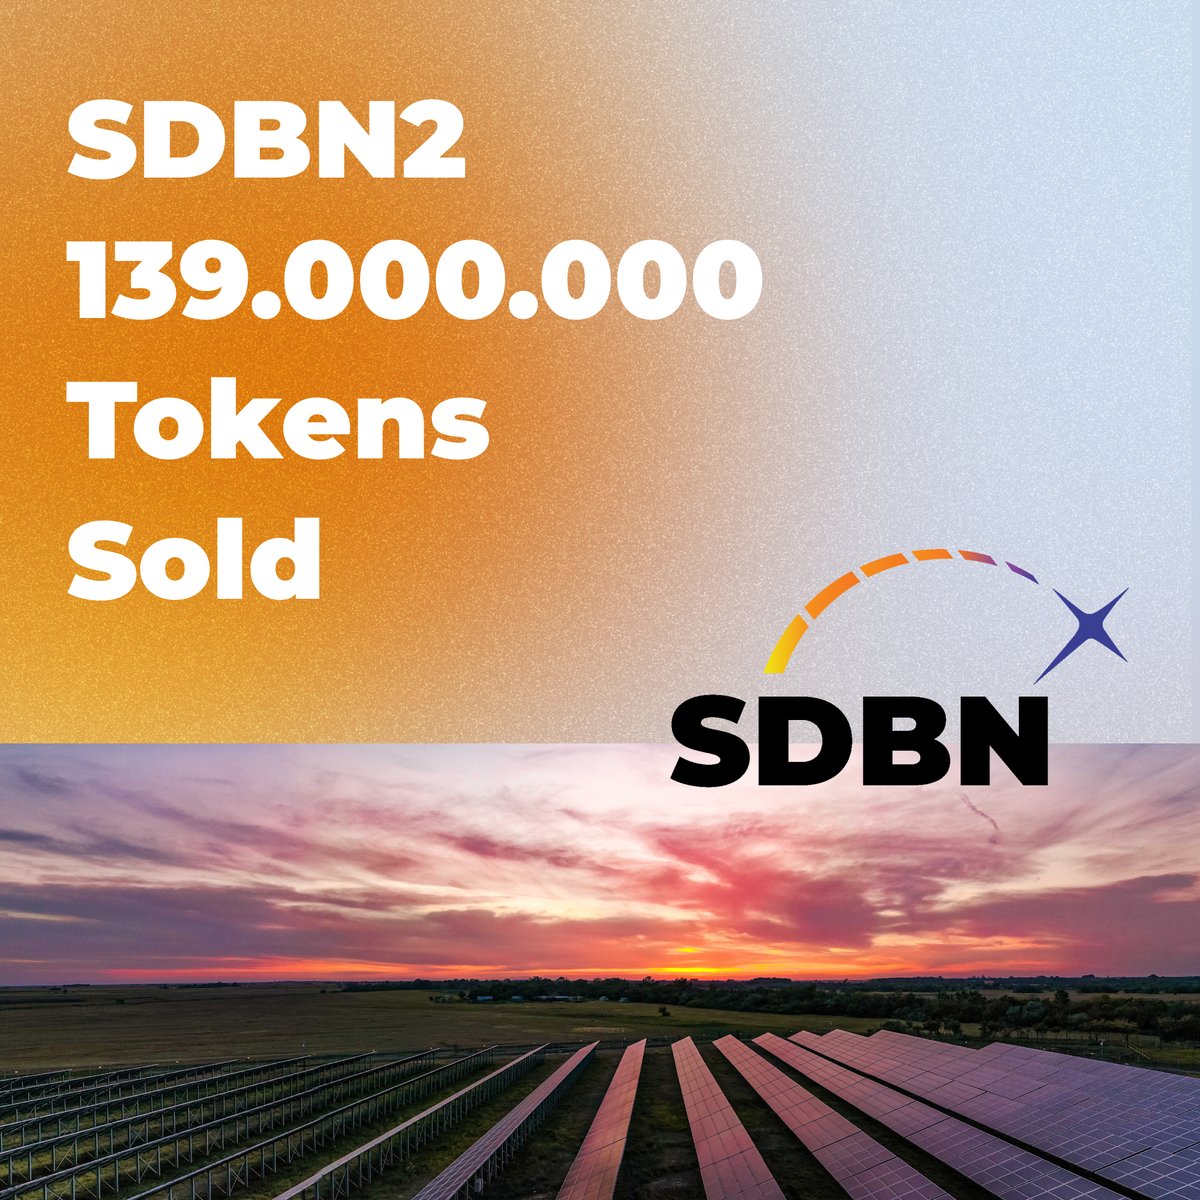 Remarkable weekend for the SDBN2 community! 🚀 Over 2 million tokens sold, taking our total past 139 million! Every token sold brings us closer to the SDBN3 token release. The future of crypto is here and now! #SDBN2 #Crypto #TokenSale #SDBN3ComingSoon